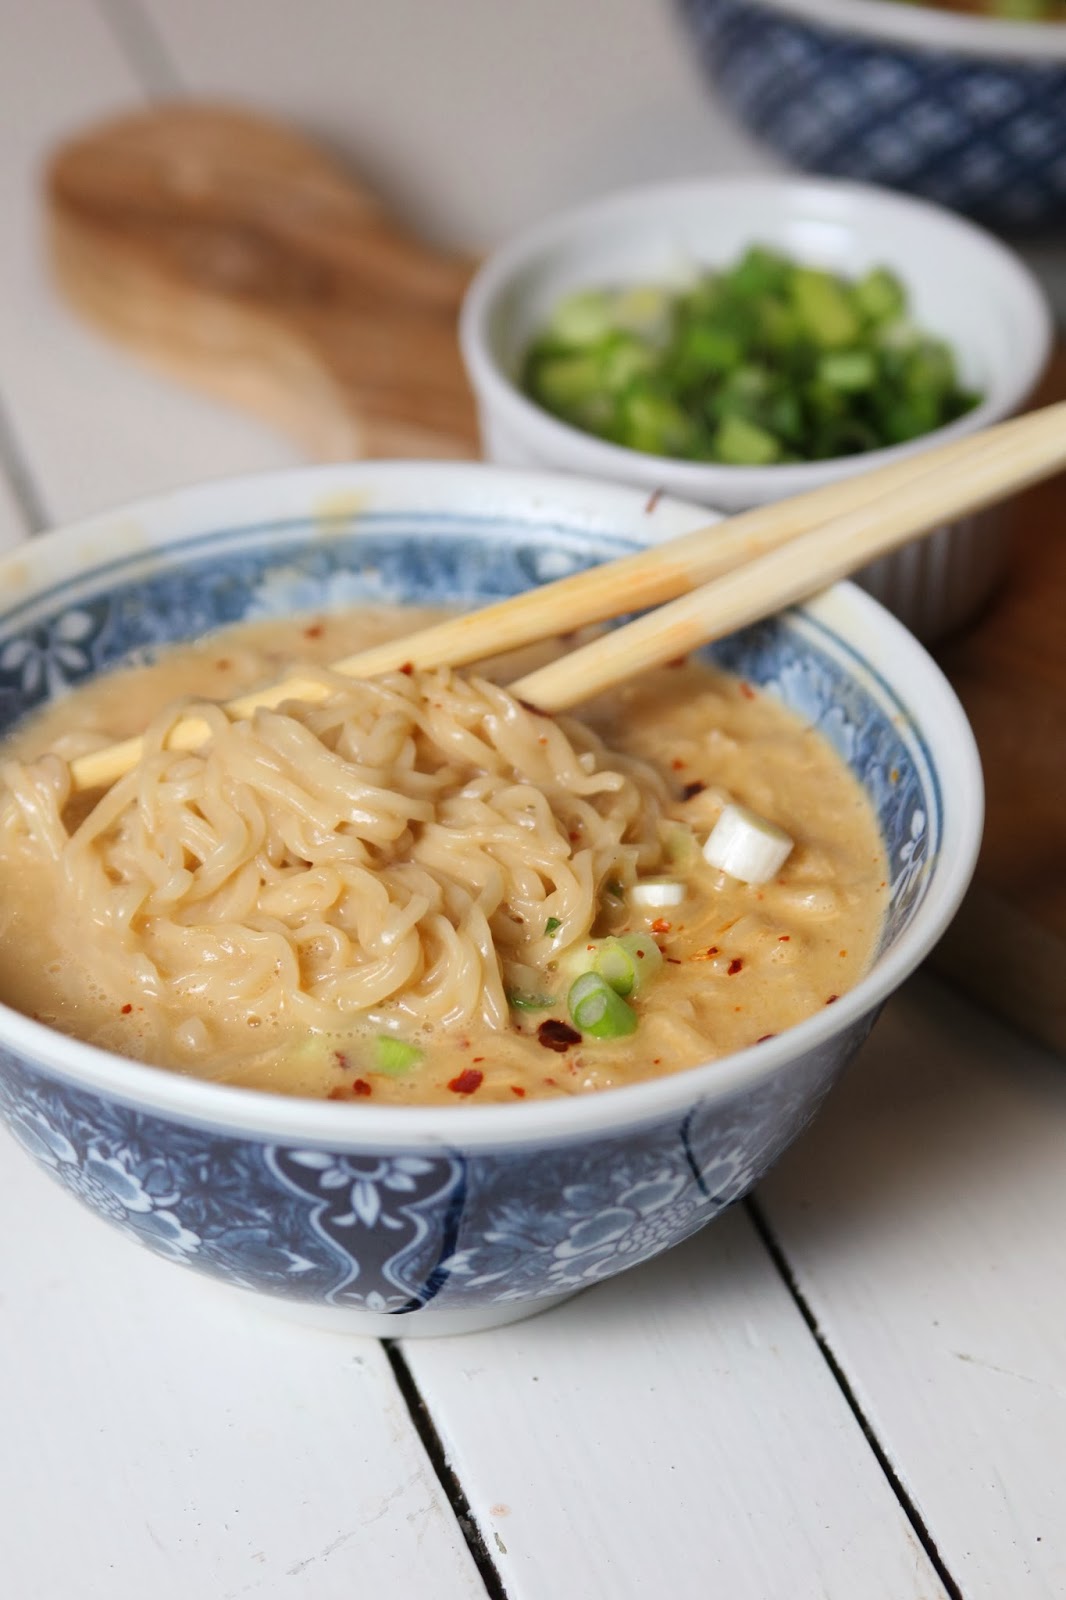 carmen's kitch: Confessions of a Ramen Lover